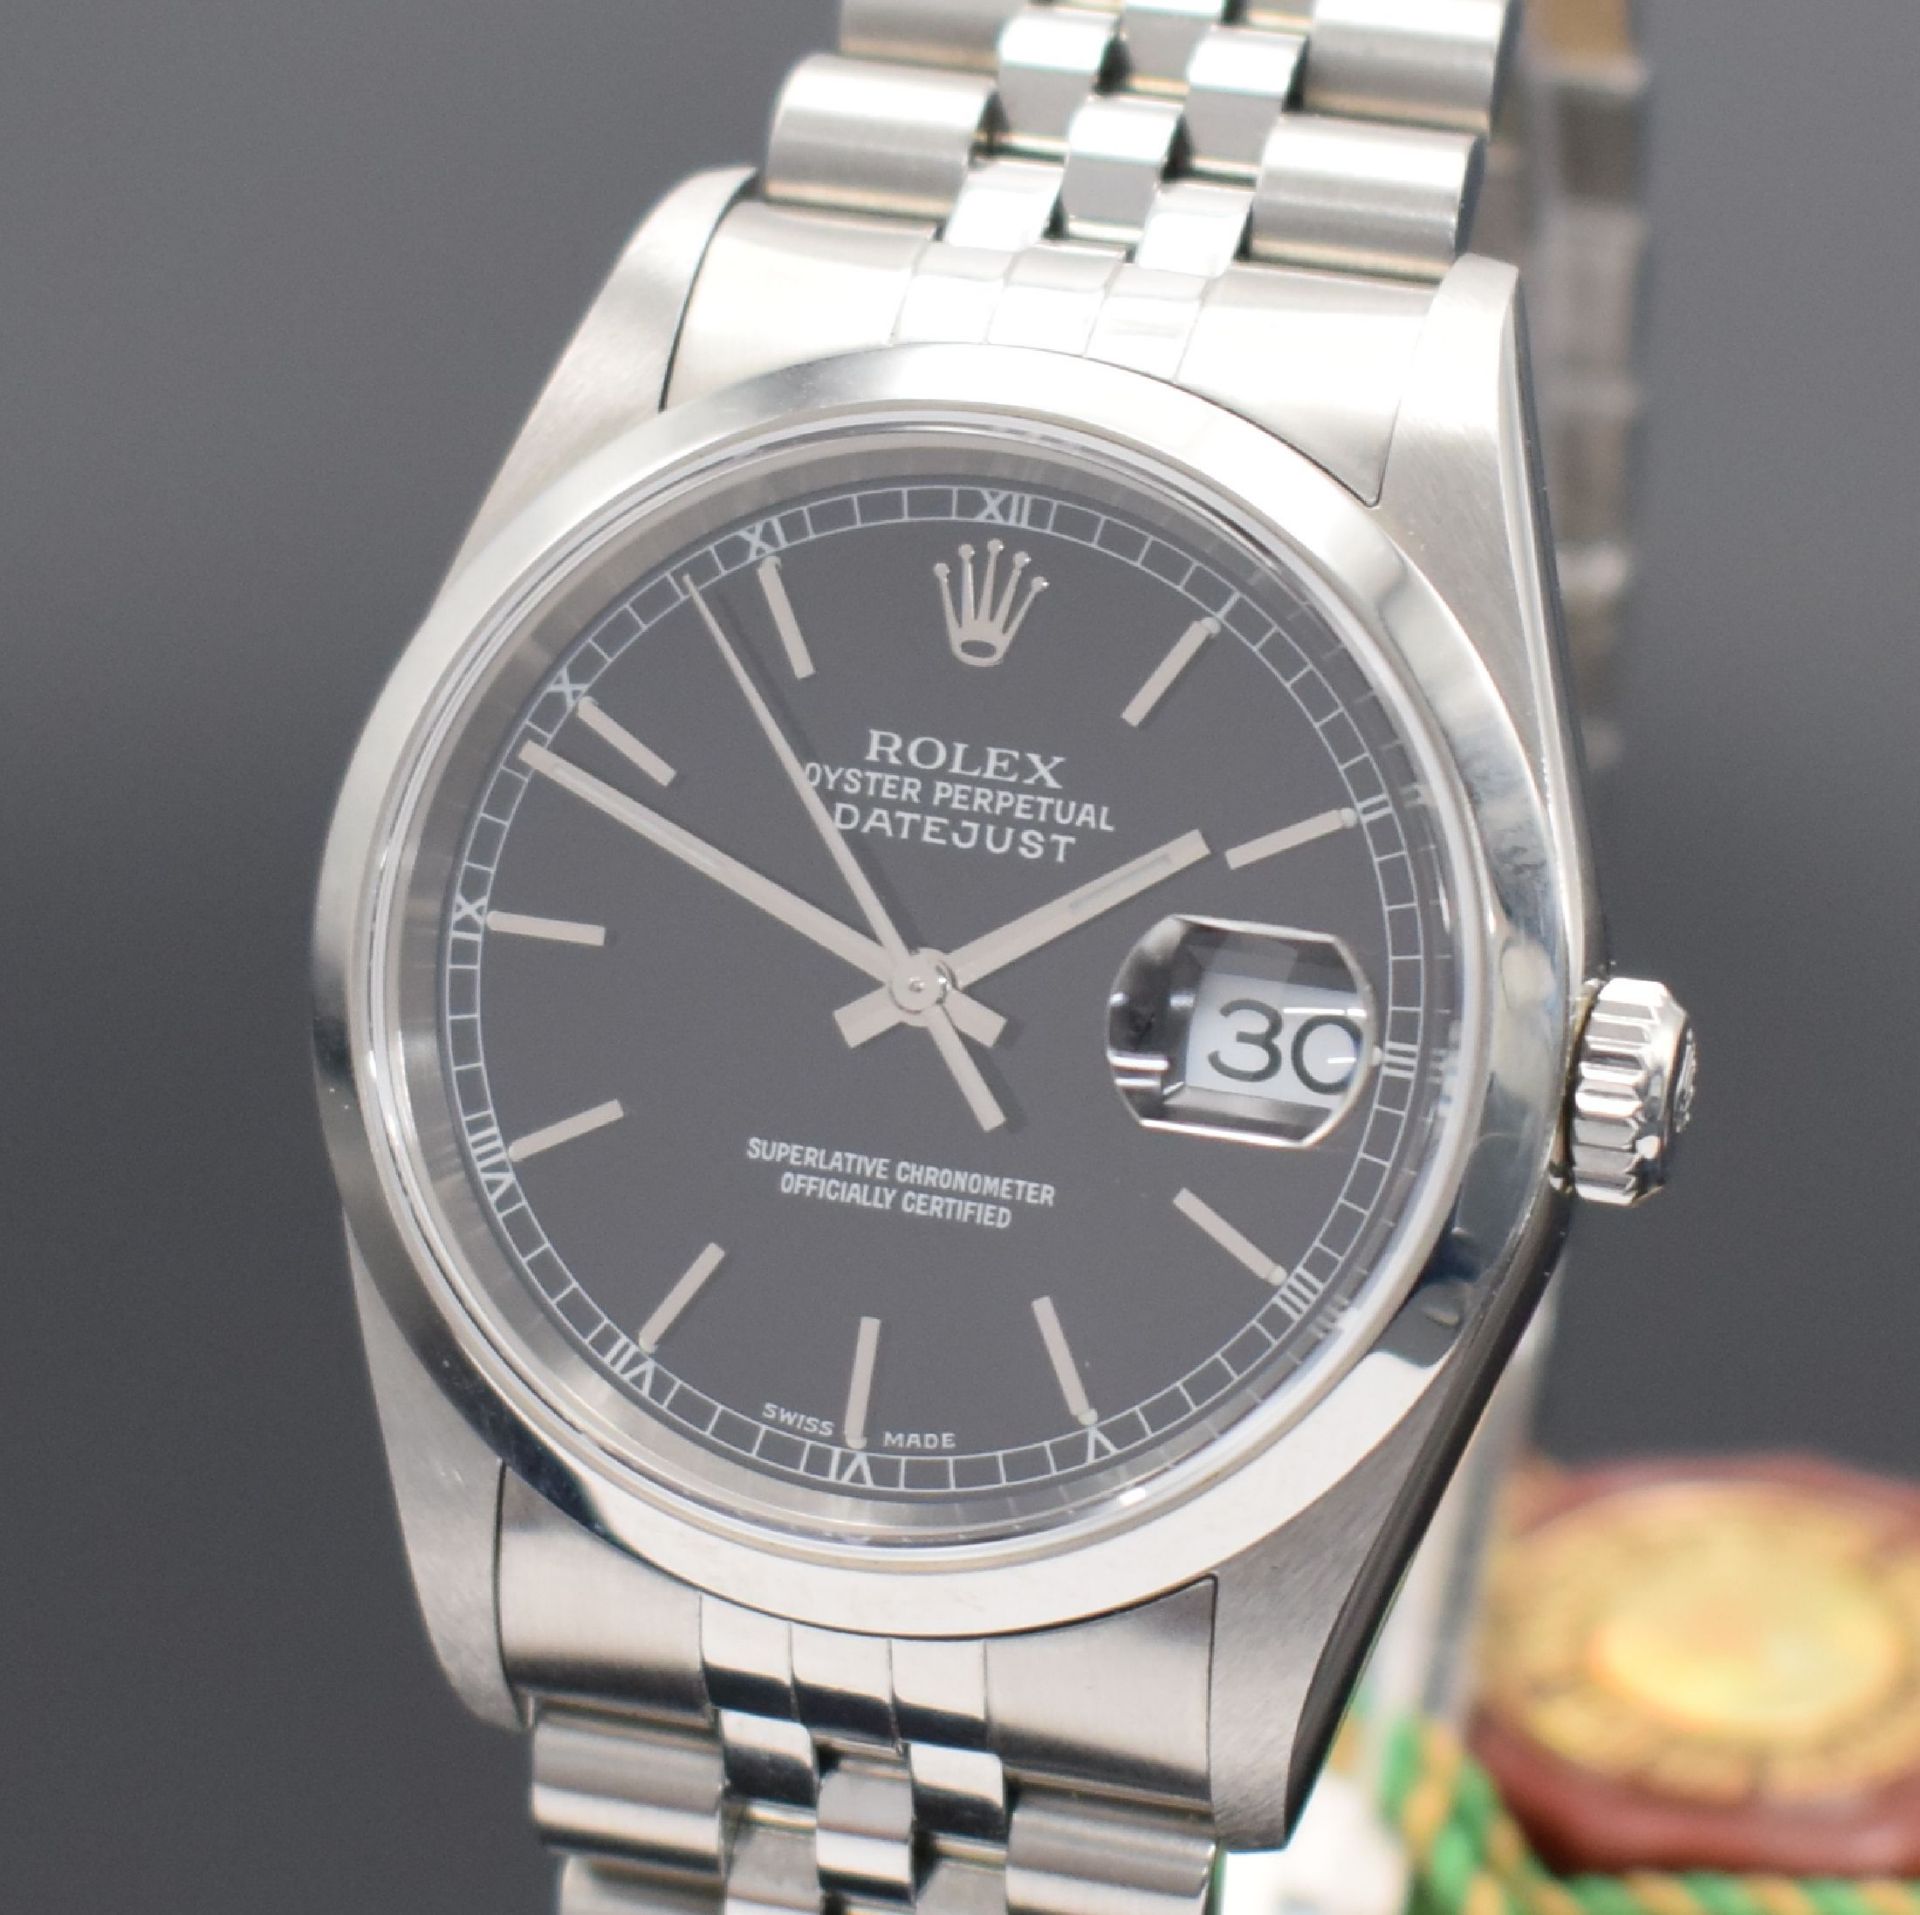 ROLEX Armbanduhr Oyster Perpetual Datejust Referenz 16200, - Image 2 of 6